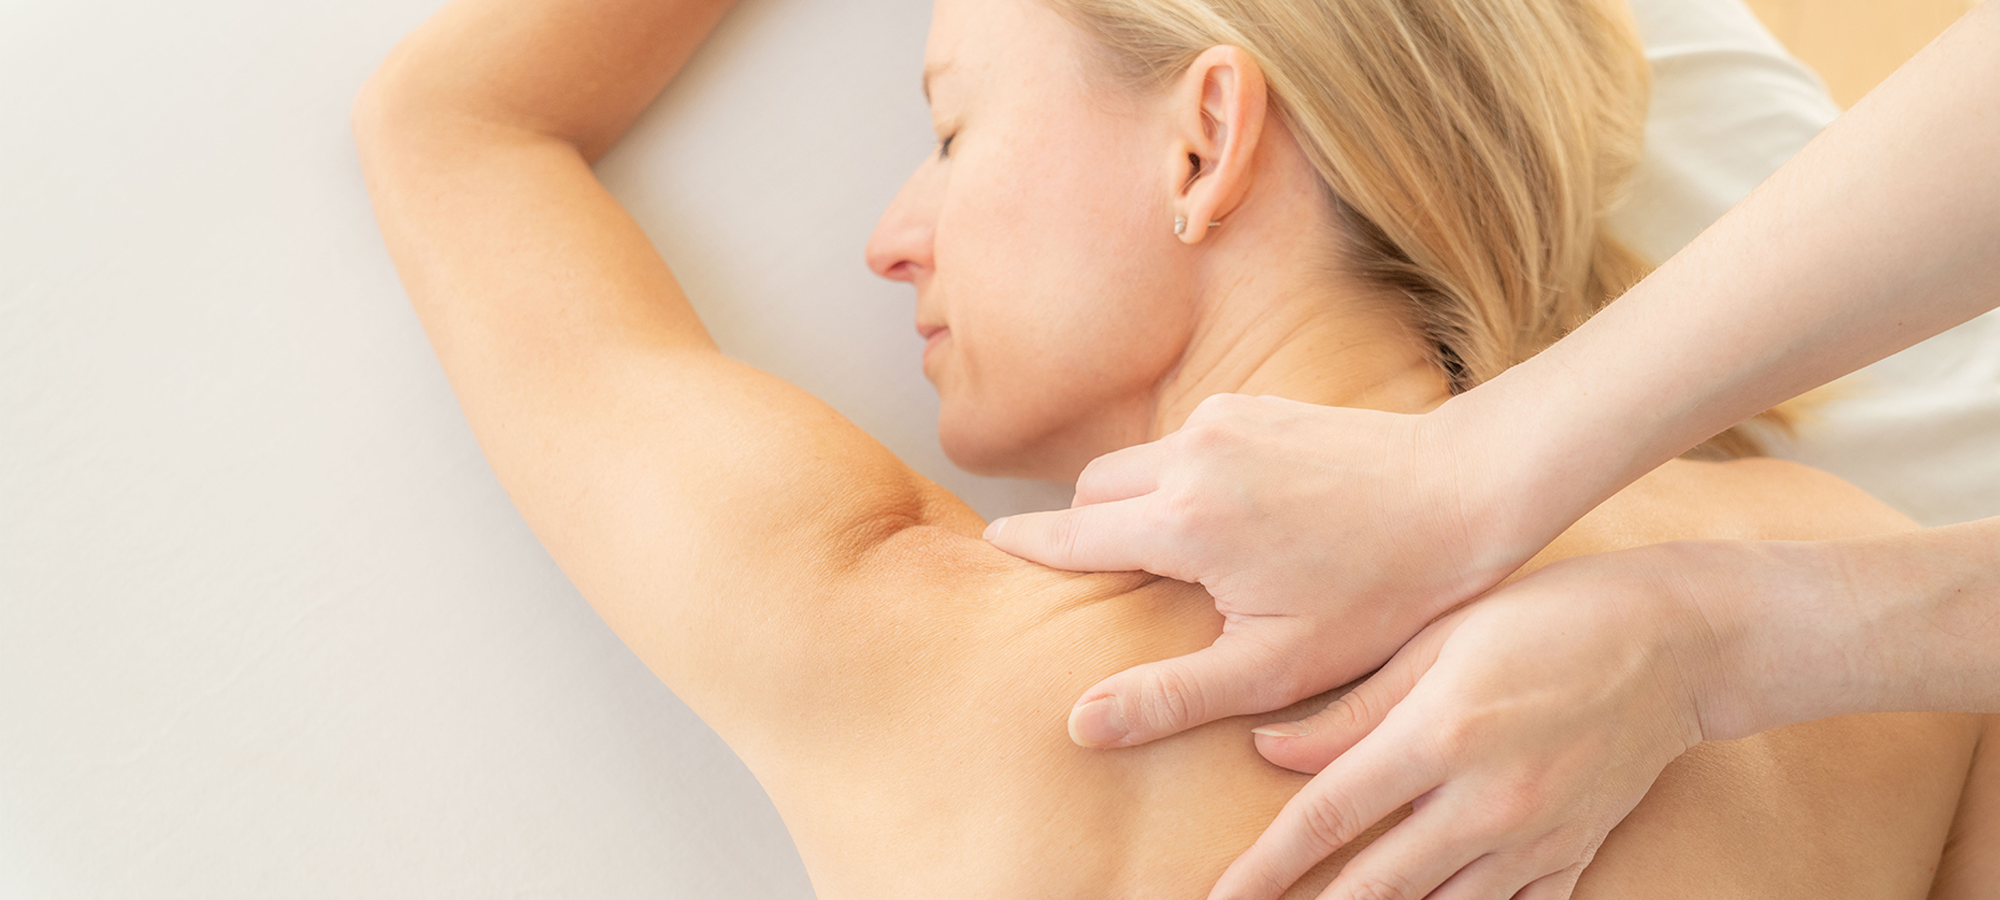 Sports Massage Therapy Brisbane That Increases Flexibility